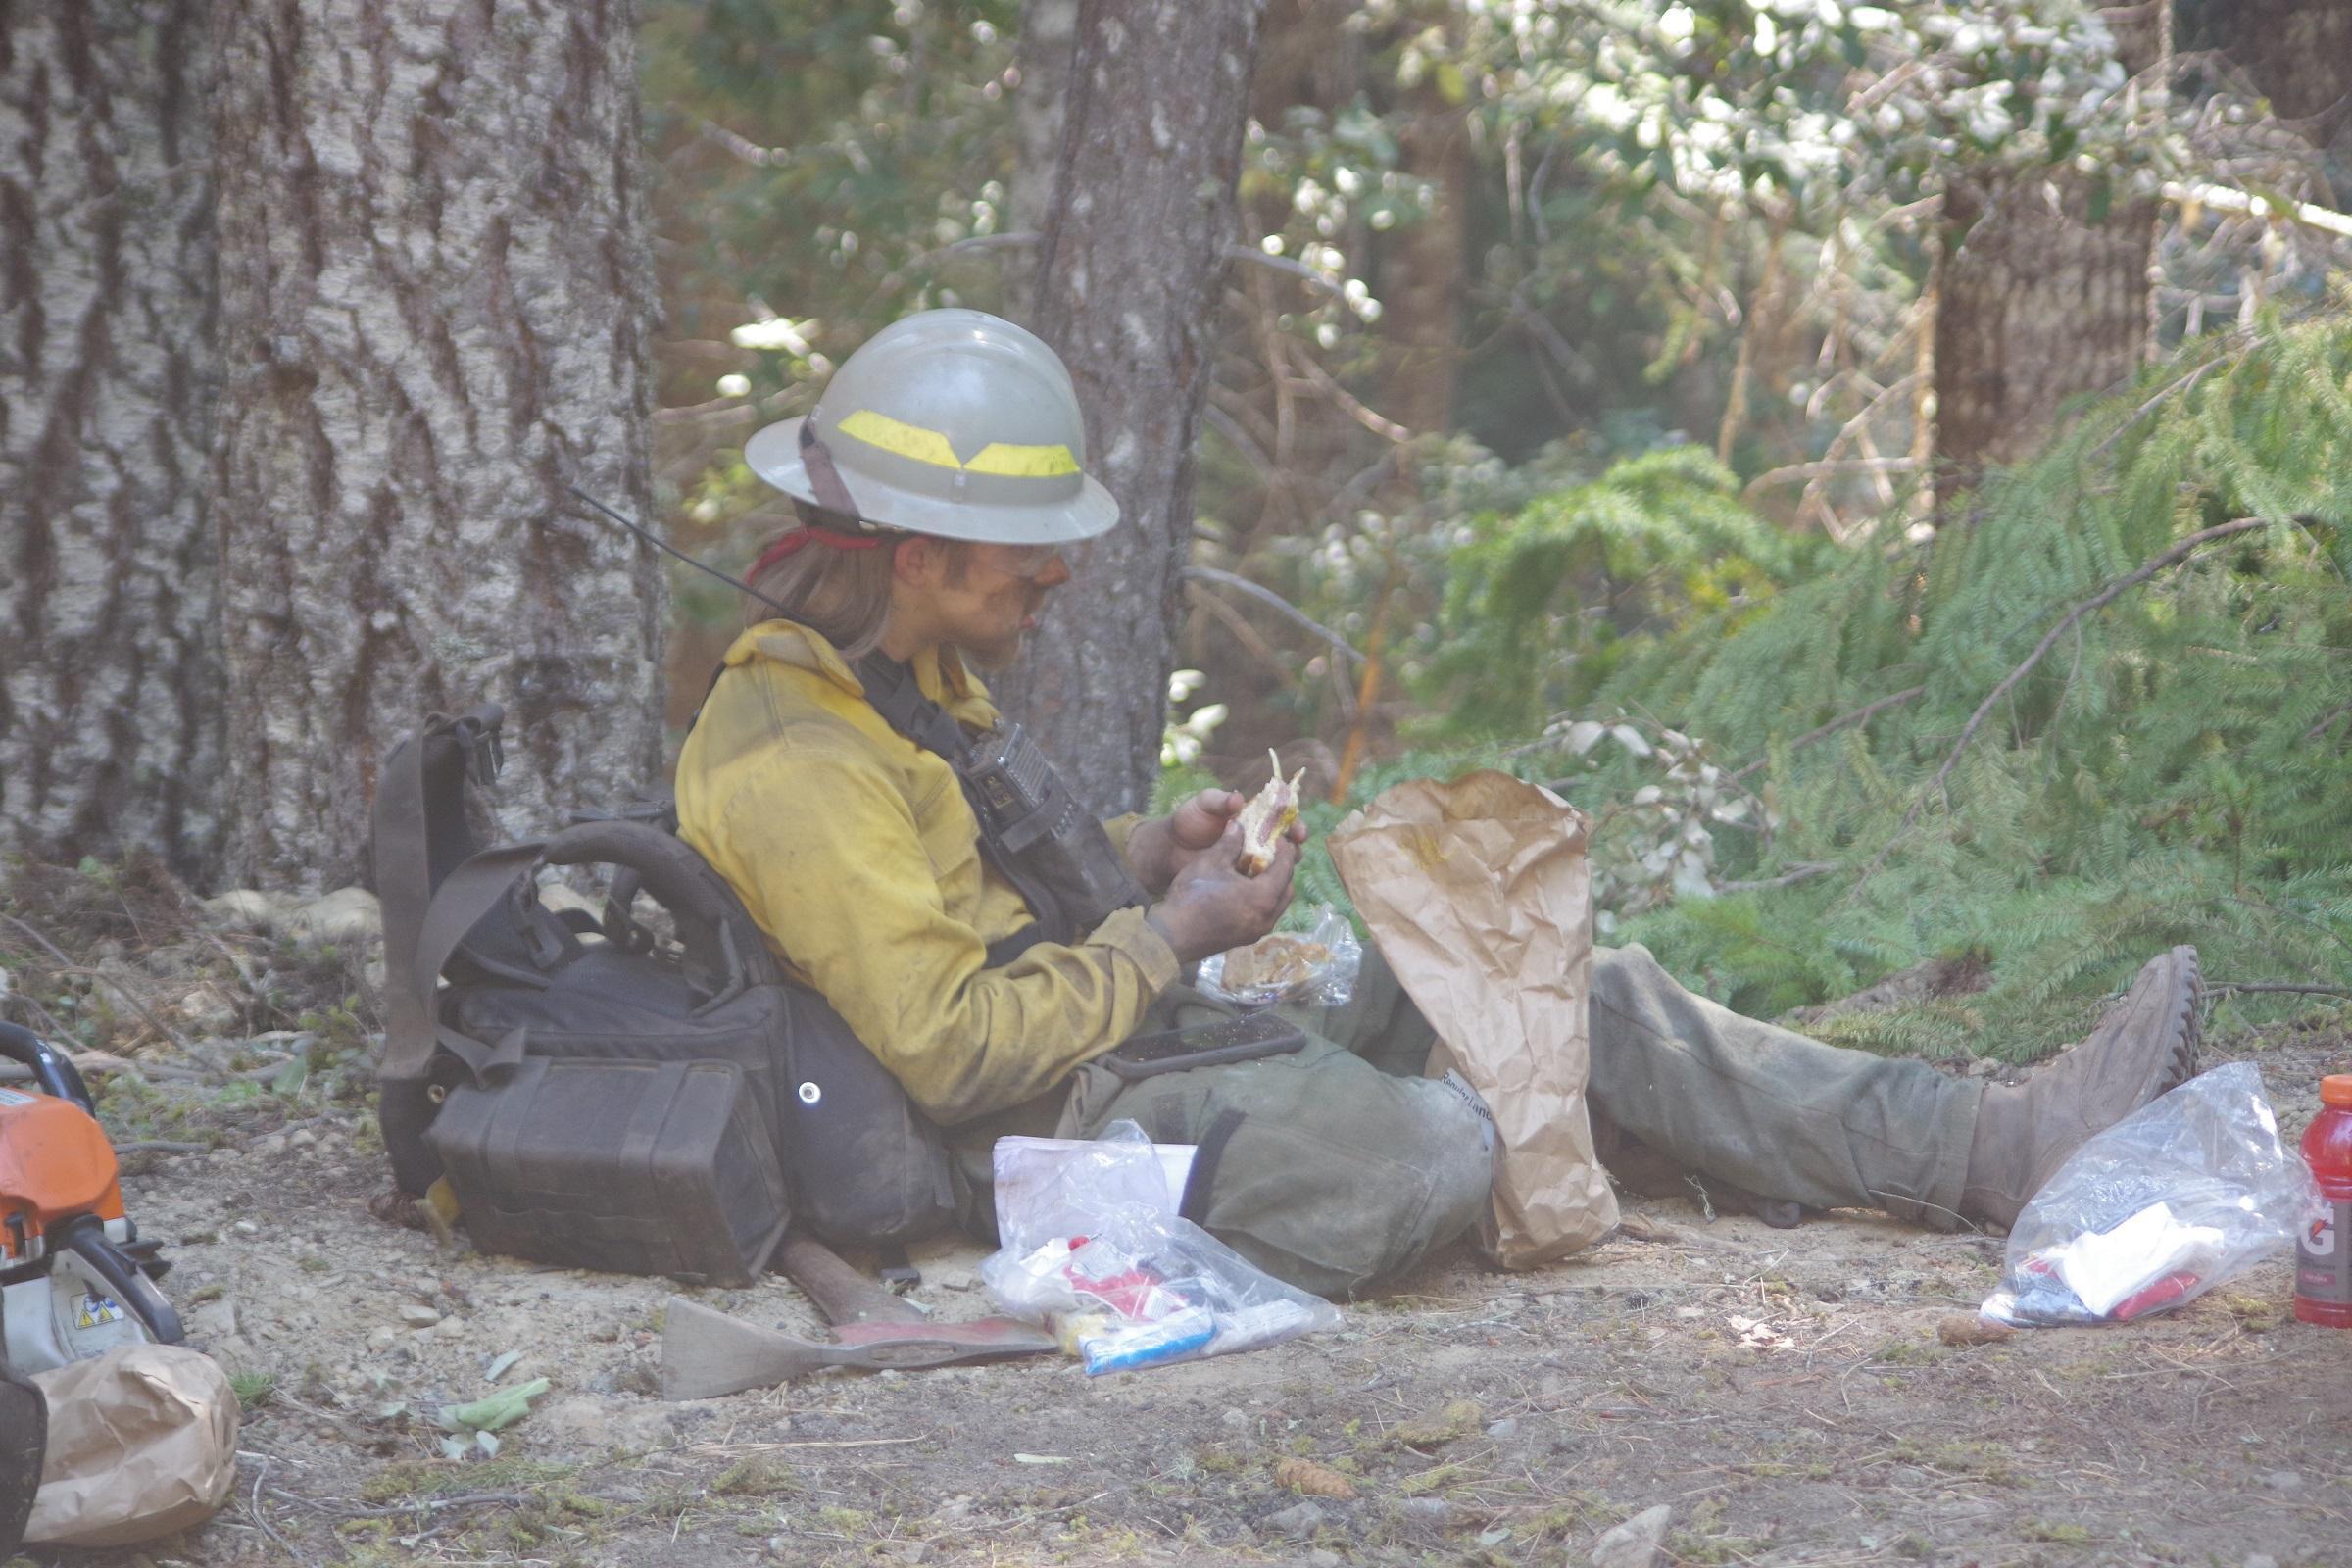 A firefighter is sitting on the ground in the dirt and ashes, eating a sandwich.